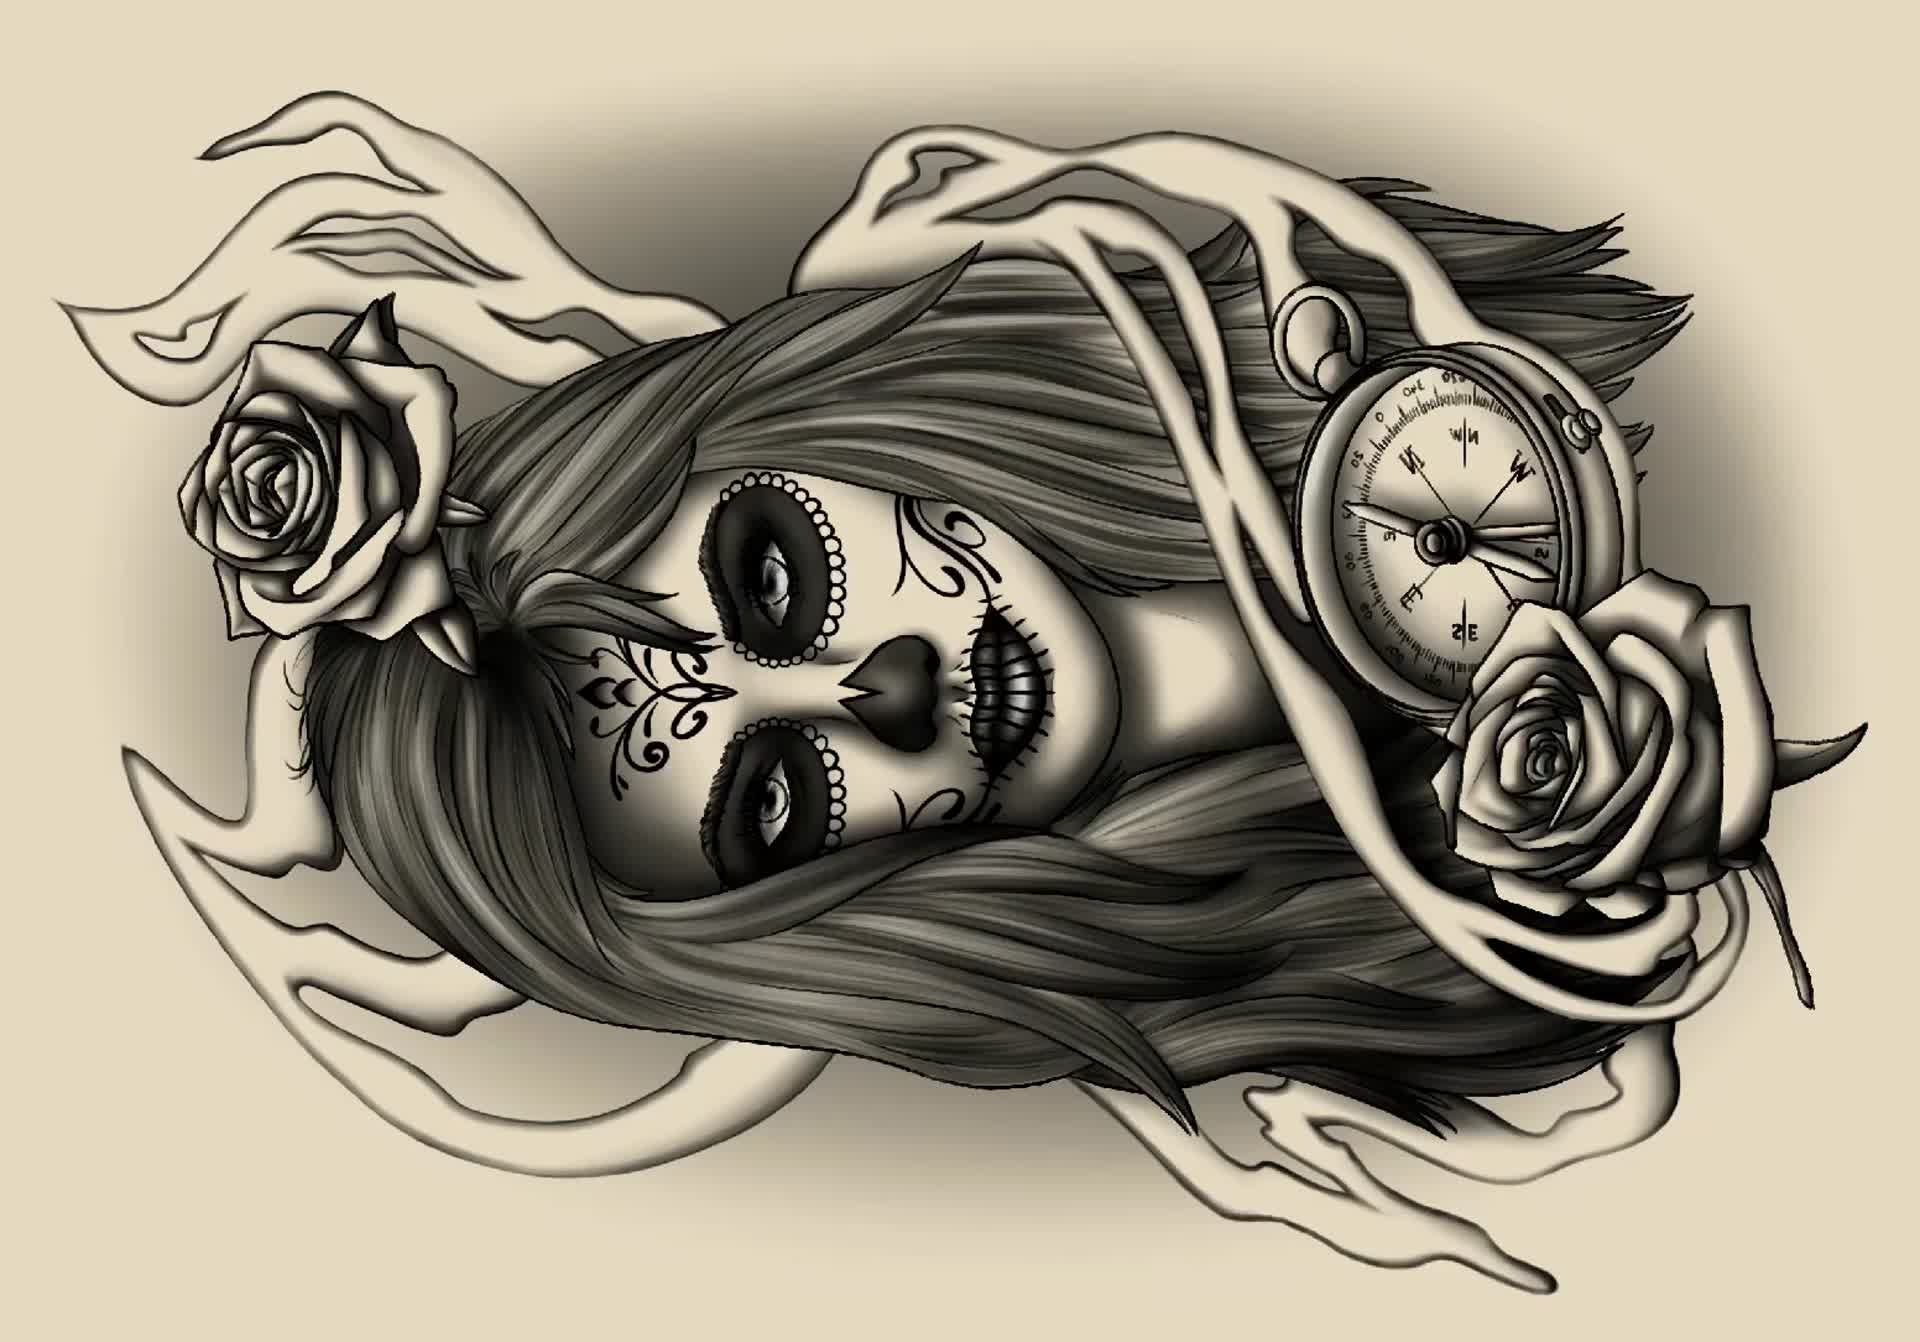 280+ Best Sugar Skull Tattoo Designs With Meanings (2020) Día de los  Muertos | Skull girl tattoo, Sugar skull girl tattoo, Skull tattoo design